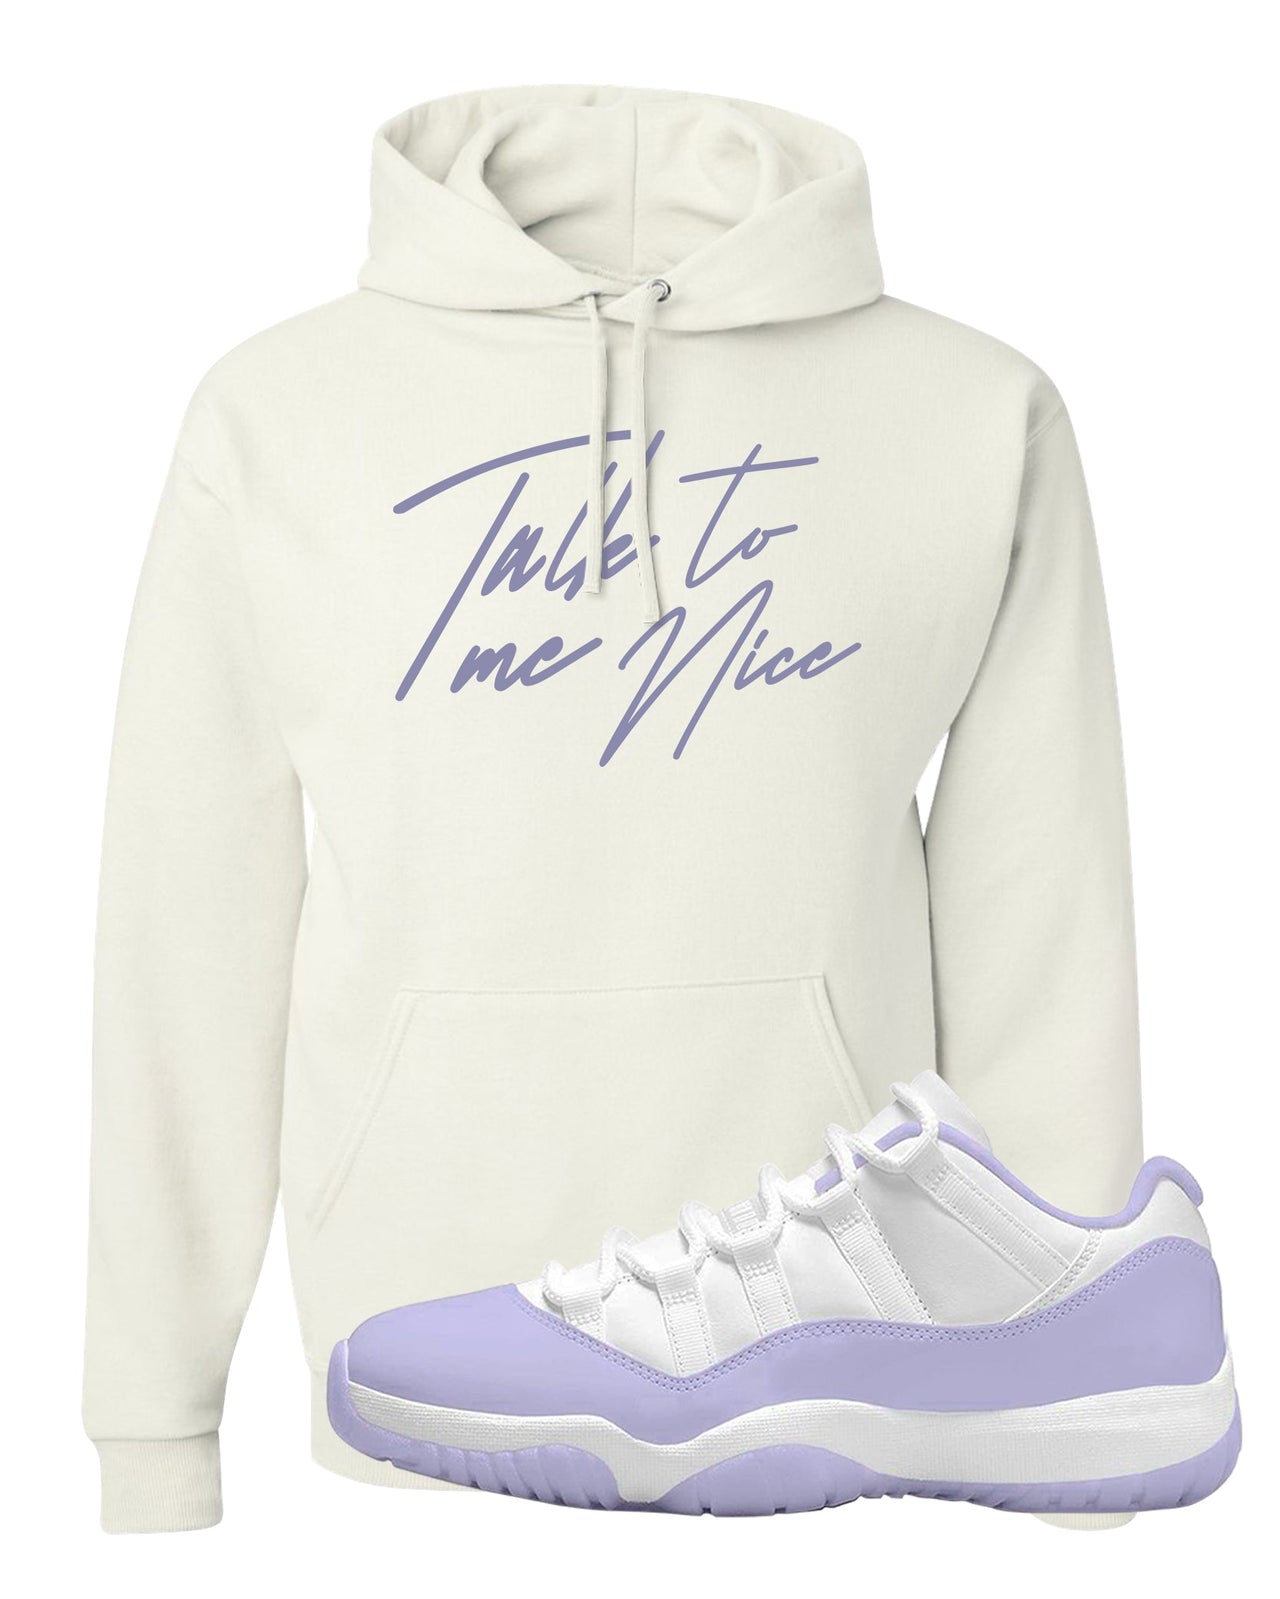 Pure Violet Low 11s Hoodie | Talk To Me Nice, White